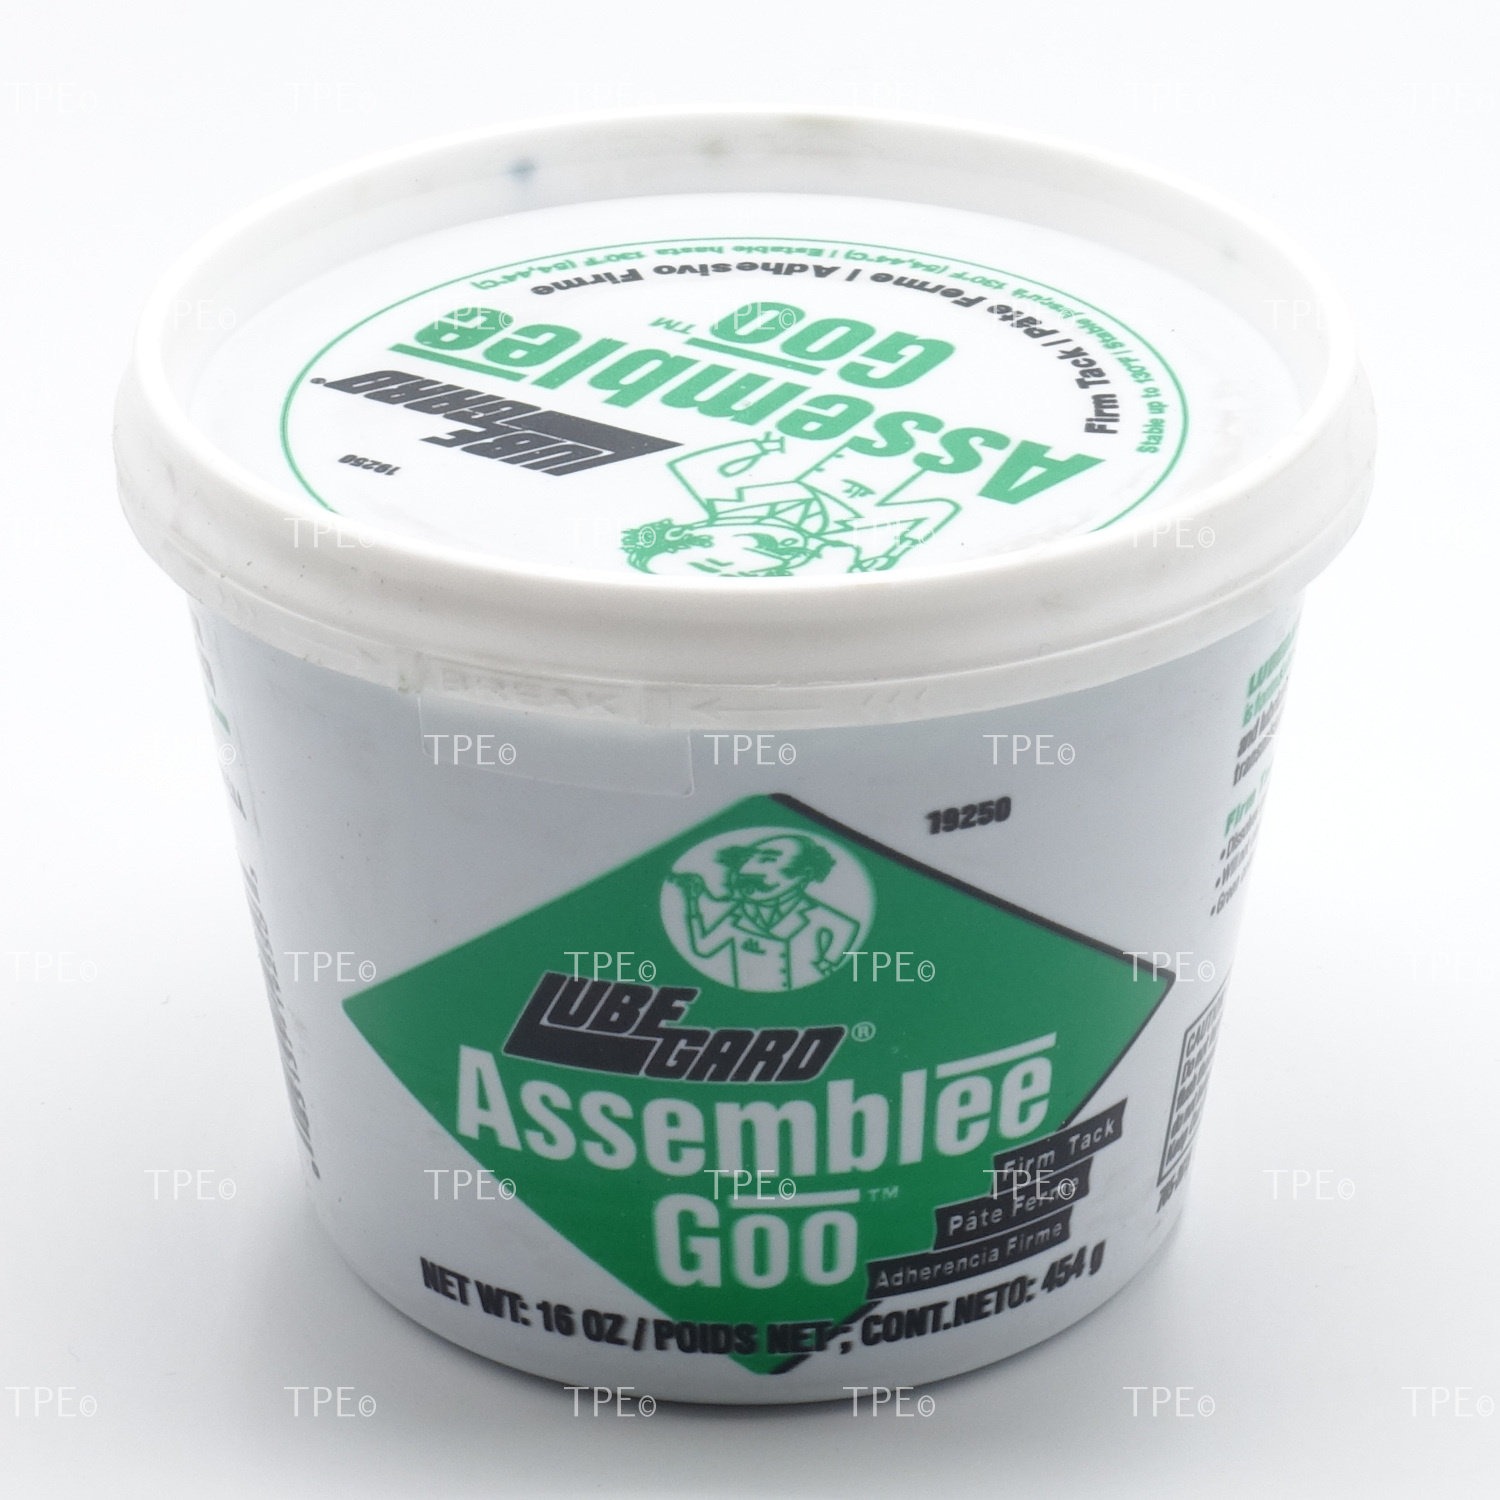 08.LU.19250 DESCRIPTION
ASSEMBLEE GOO is formulated for use as an assembly aid and lubricant for virtually any assembly application (including engines*). It provides helps facilitate the assembly process by holding components such as needle bearings and hydraulic seals in place. Assemblee Goo™ also provides the initial lubrication for the moving parts on the first start-up after service, preventing wear and scoring.

Our Assemblee Goos have been improved and are now formulated with our new LXE-XP™ additive to offer 'Extra Protection' against wear. This new technology now protects surfaces on a molecular level to offer unsurpassed anti-wear protection.

Simply apply to O-rings, seals, bearings, gaskets, sealing rings, bushings, thrust washers and more during the build process.

* Not for use on new camshaft lobe break-in when rebuilding overhead valve pushrod engines. Use a break-in product specific to that application.

FEATURES & BENEFITS
• Provides your choice of tack strength, firmer (GREEN) great for summer months and lighter tack (BLUE) great for winter months
• No water/soapy residue to contaminate new automatic transmission fluid
• Dyed green or blue to prevent misdiagnosing leaks
• Will not melt at shop temperatures
• Not harmful with prolonged skin contact
• Will not clog filters
• Dissolves quickly at operating temperatures
• Compatible with all transmission fluids
• Proprietary formula contains LXE-XP™ Technology